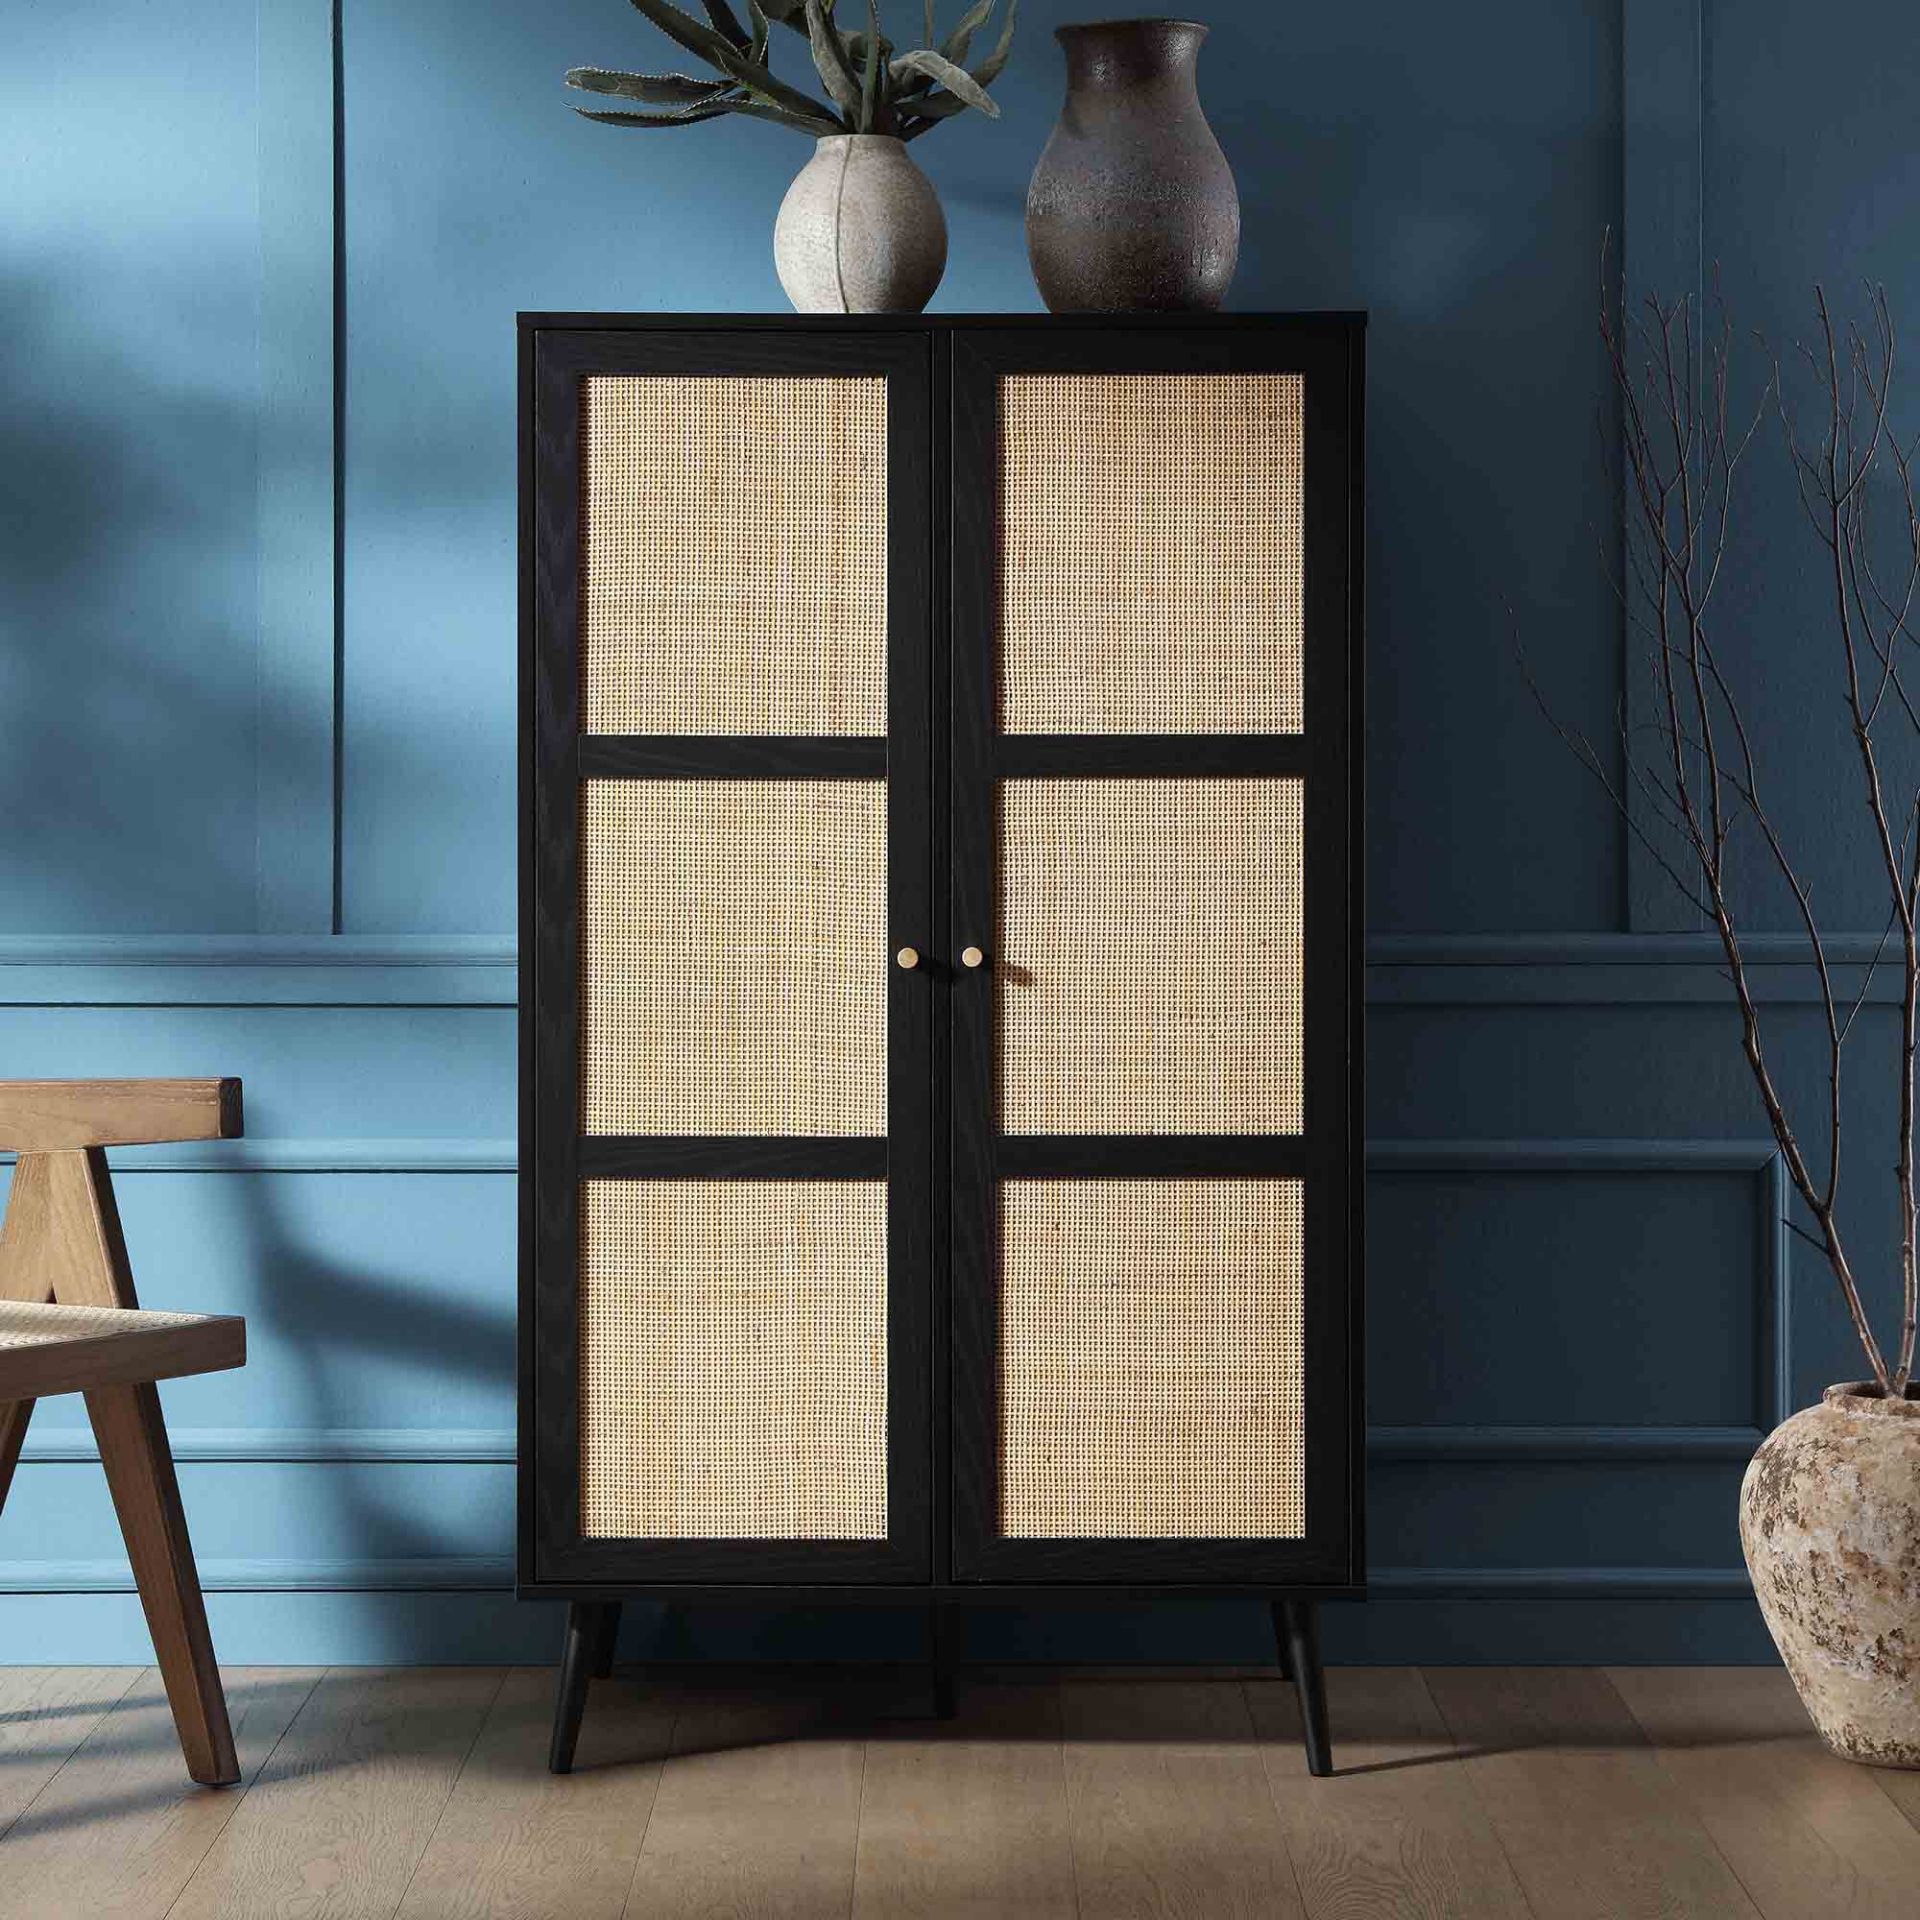 Frances Woven Rattan Compact Double Wardrobe, Black. -R14. RRP £379.99. Crafted from wood and